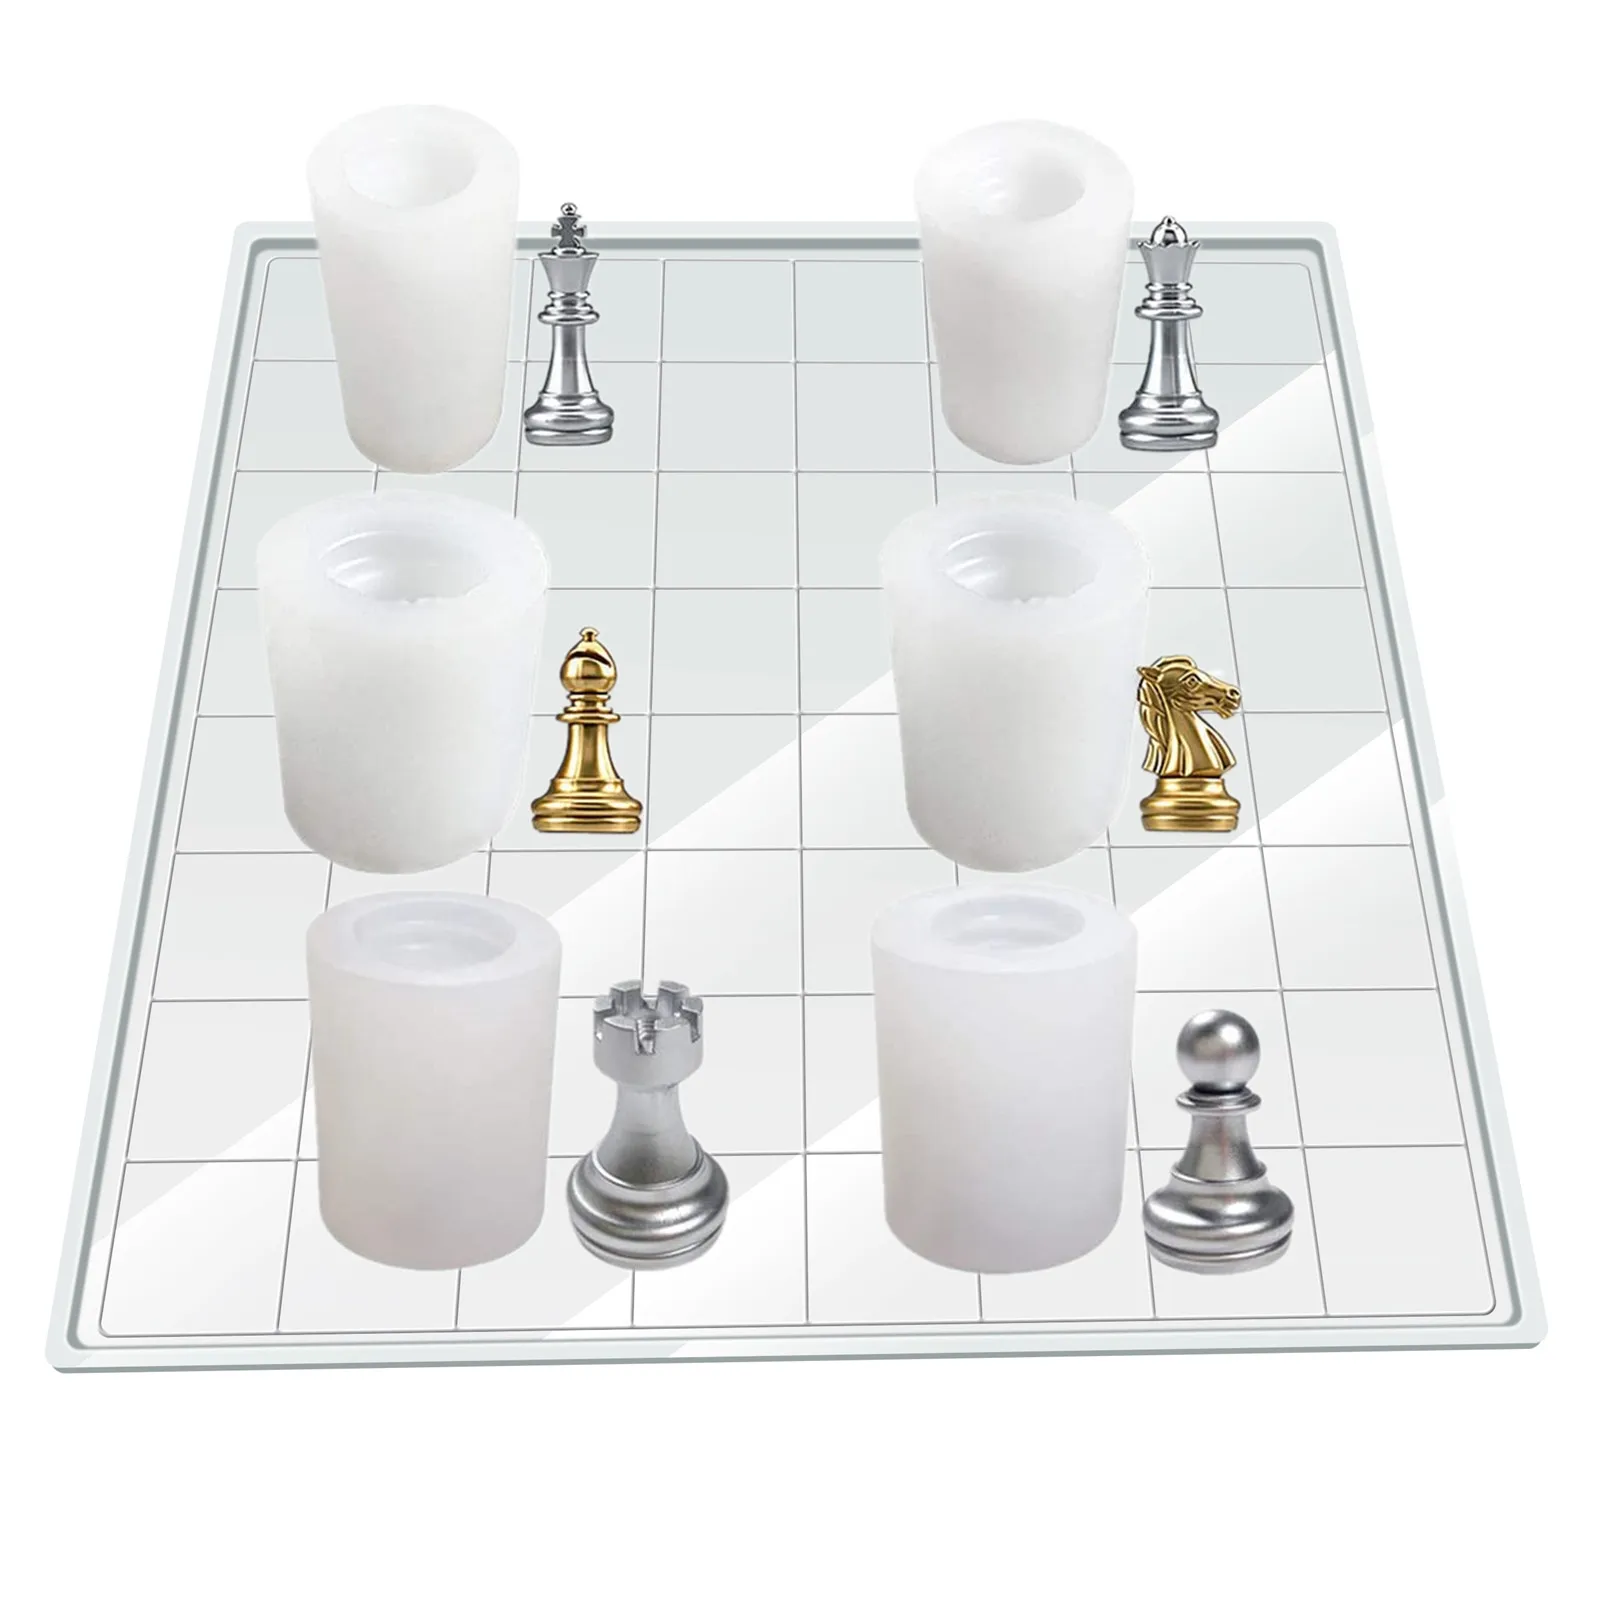 

3D International Chess Silicone Mold Chocolate Candy Cake Cupcake Fondant Decorating Tool Beeswax Candle Mould